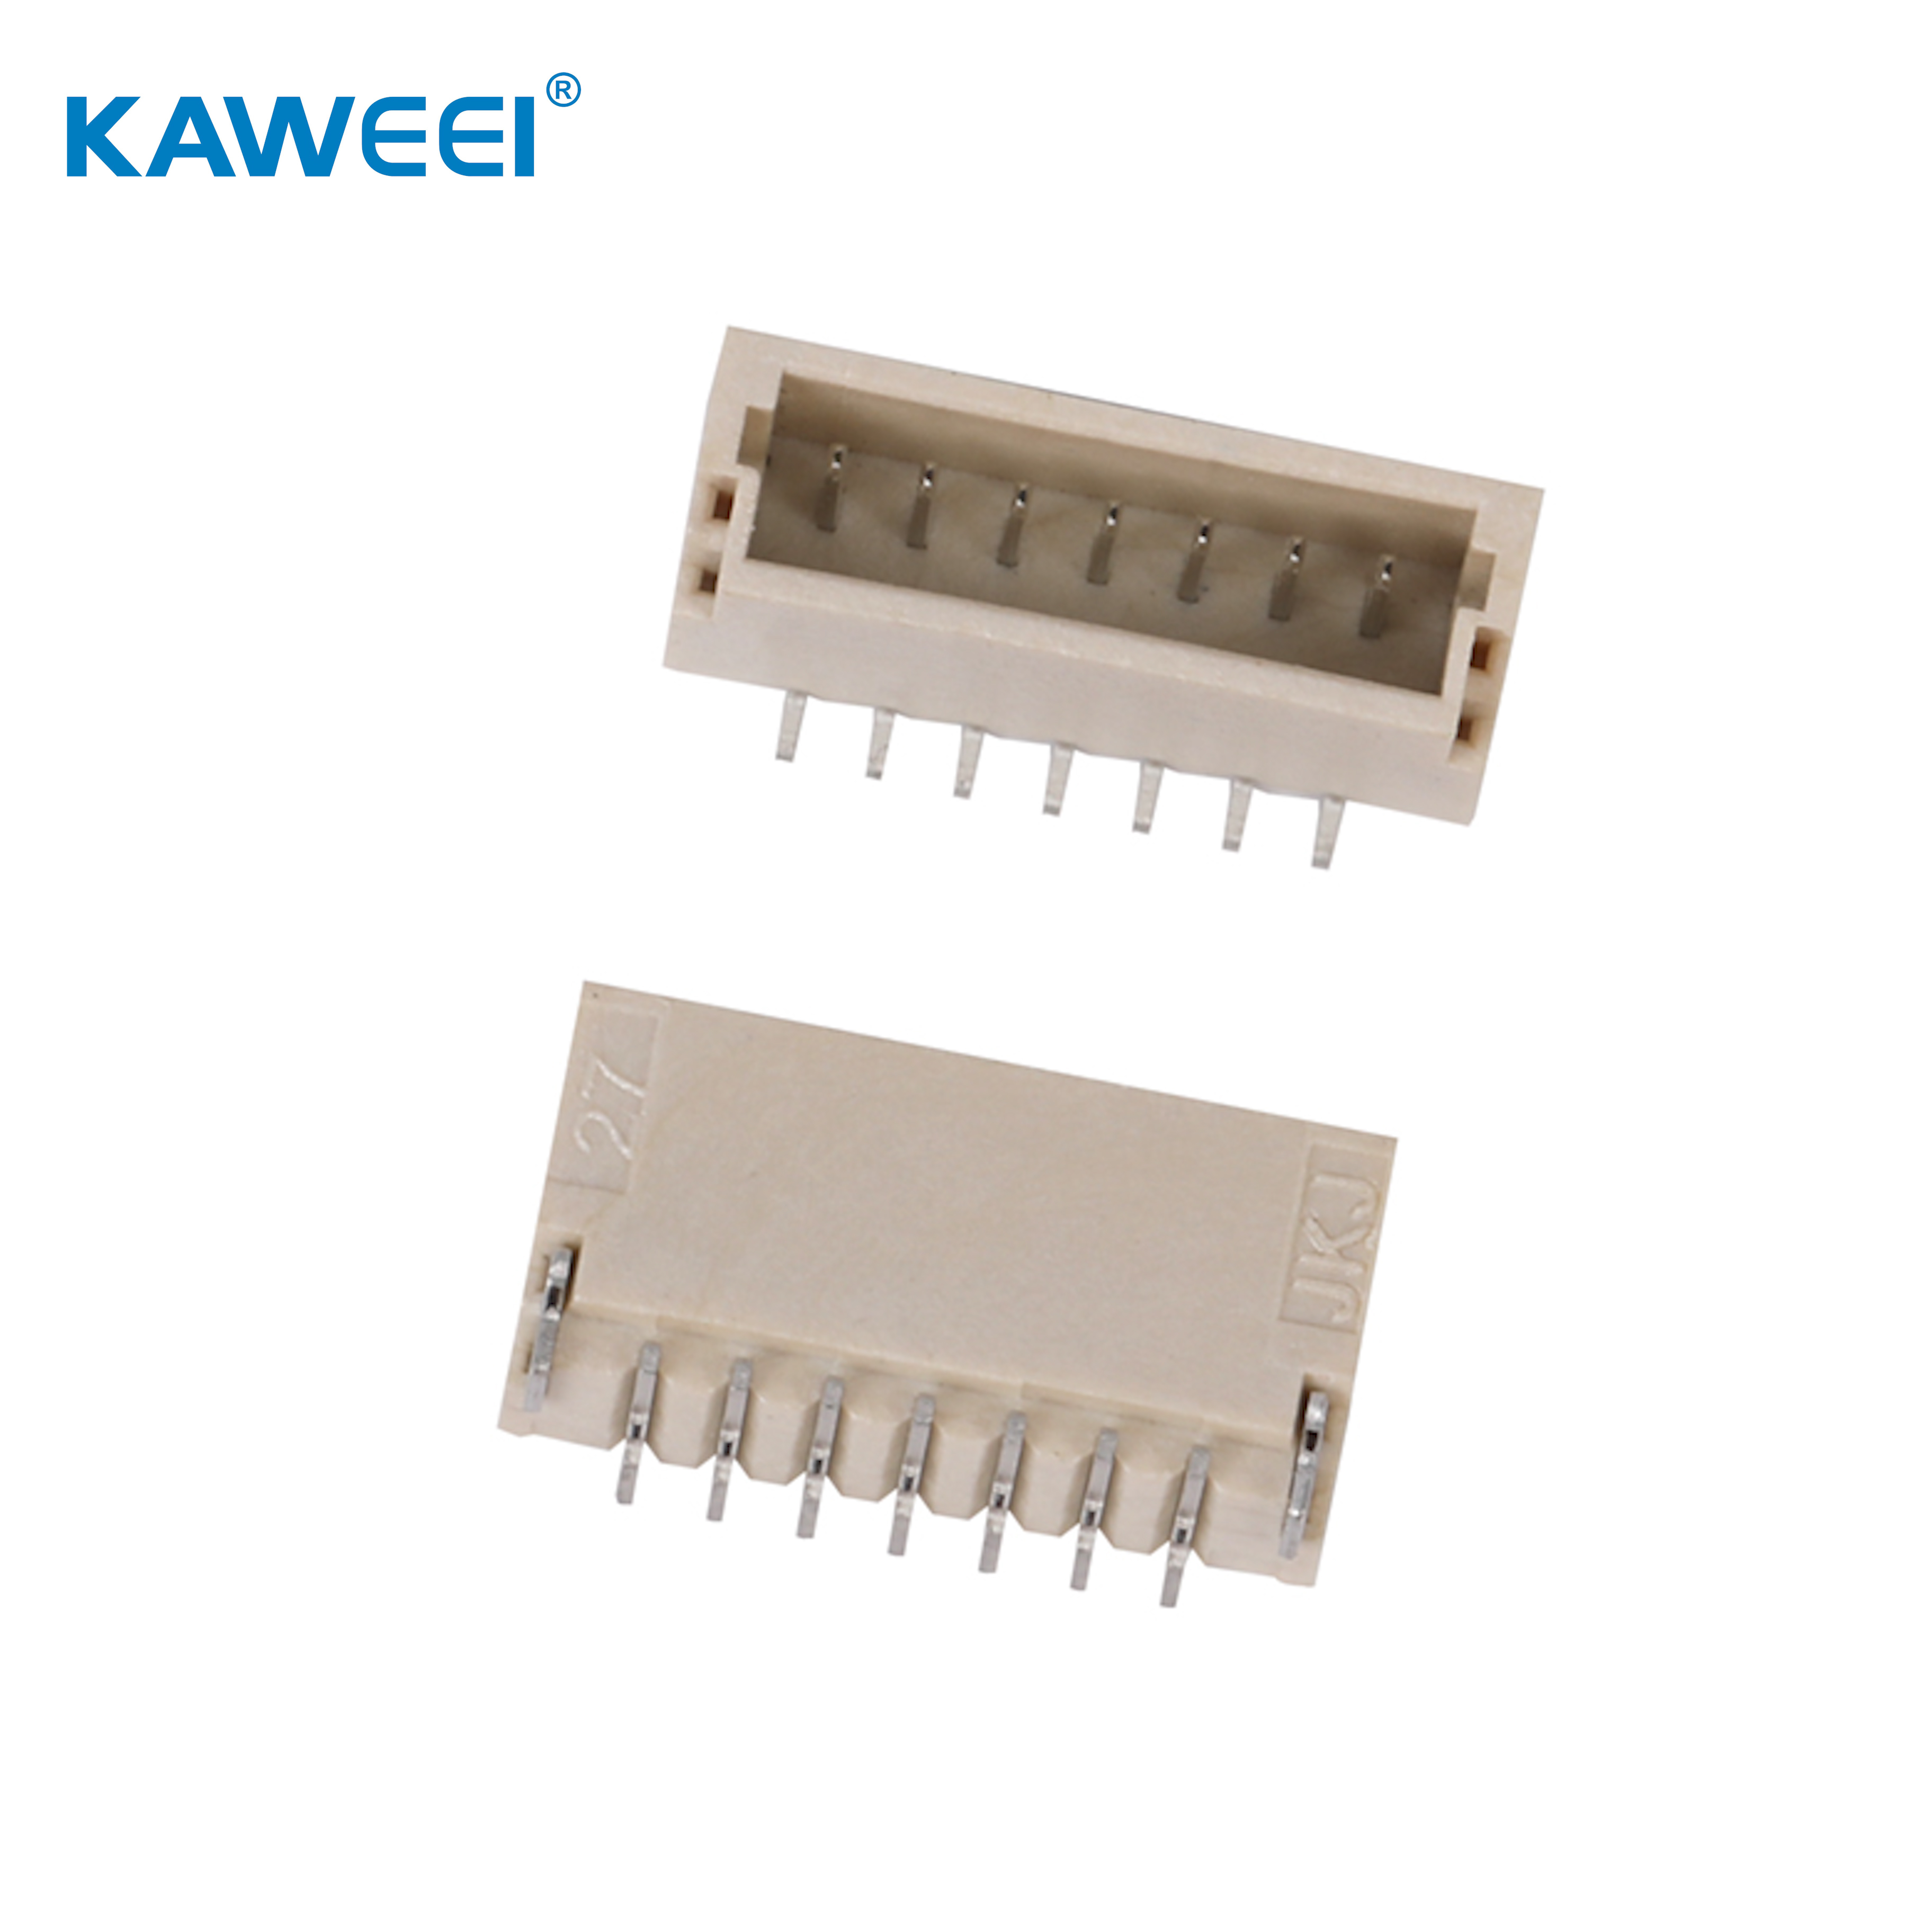 1.0mm pitch wire to board connector PCB connector